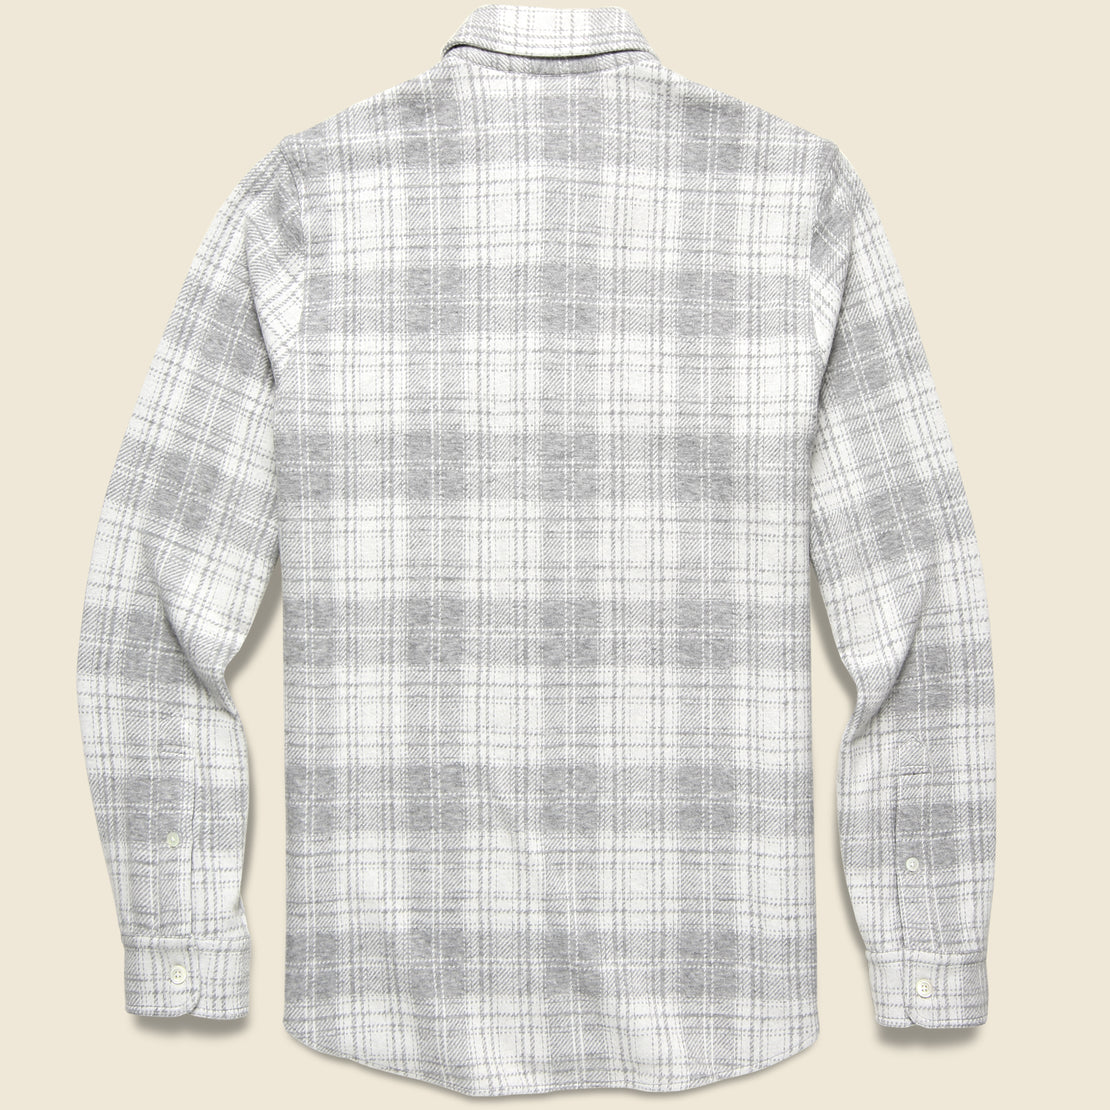 Legend Sweater Shirt - Winter Clouds Plaid - Faherty - STAG Provisions - Tops - L/S Woven - Plaid